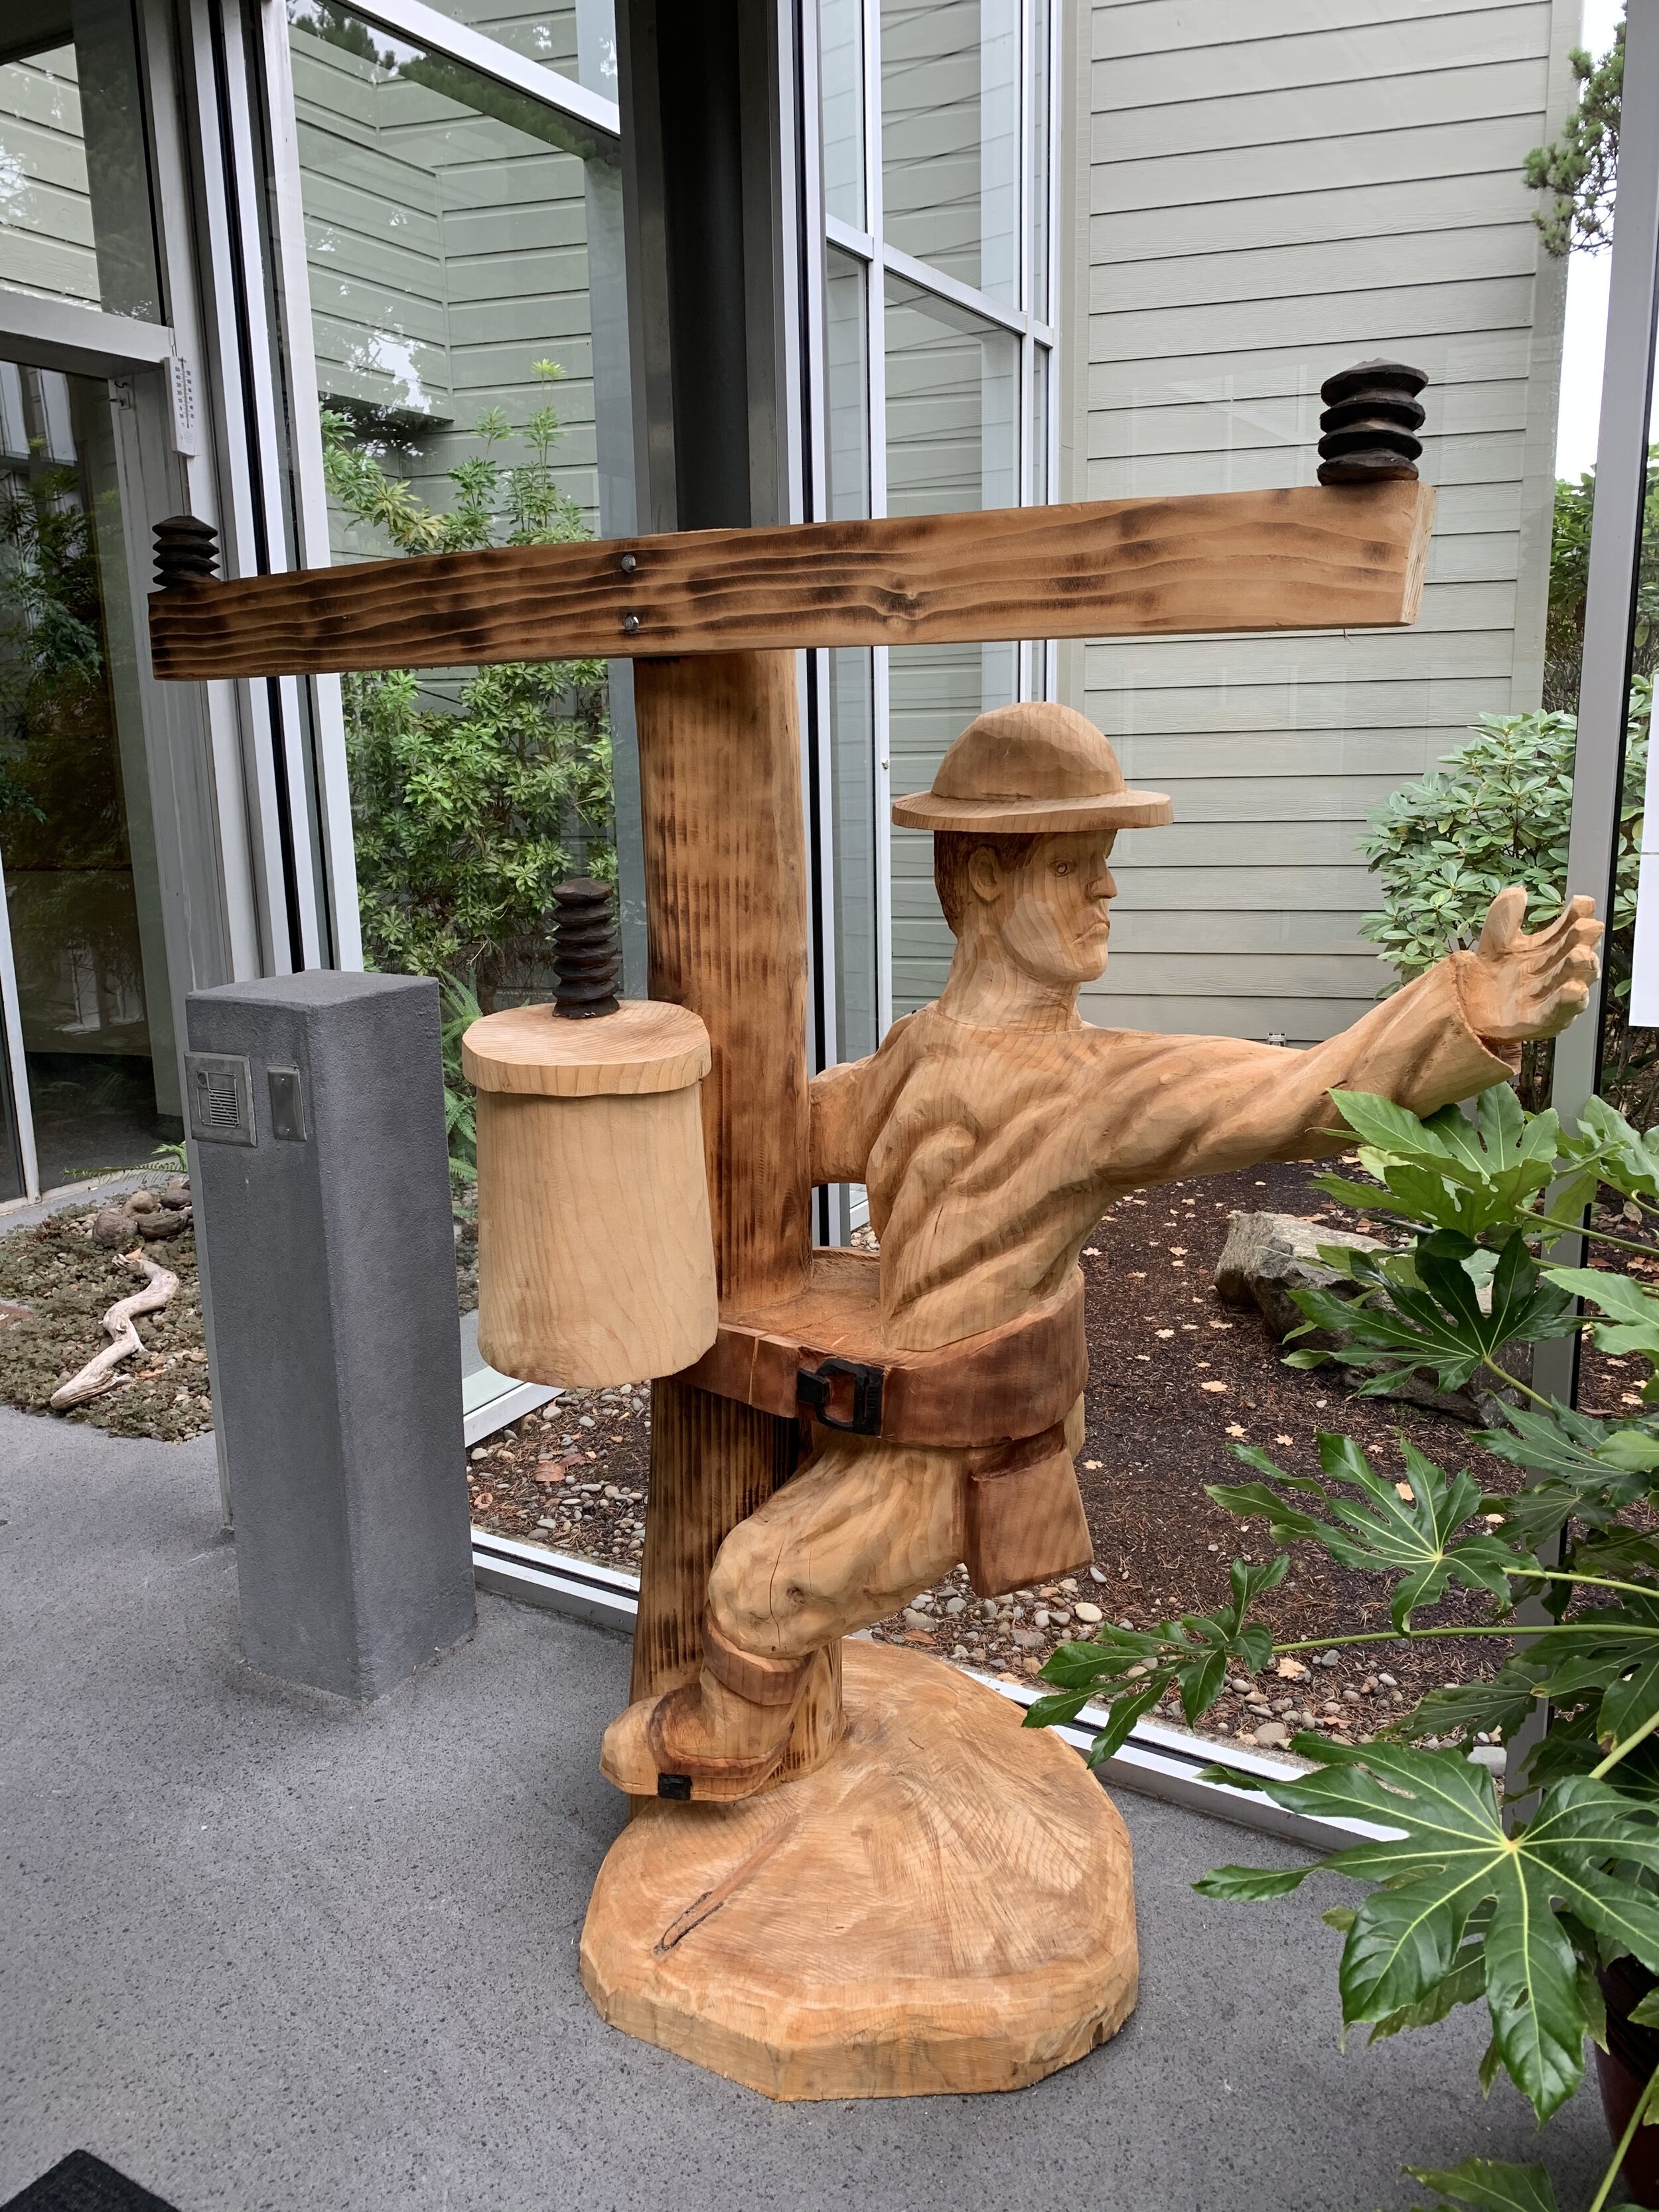 This line worker sculpture at Central Lincoln PUD was created by chainsaw artist Matt Holznagel